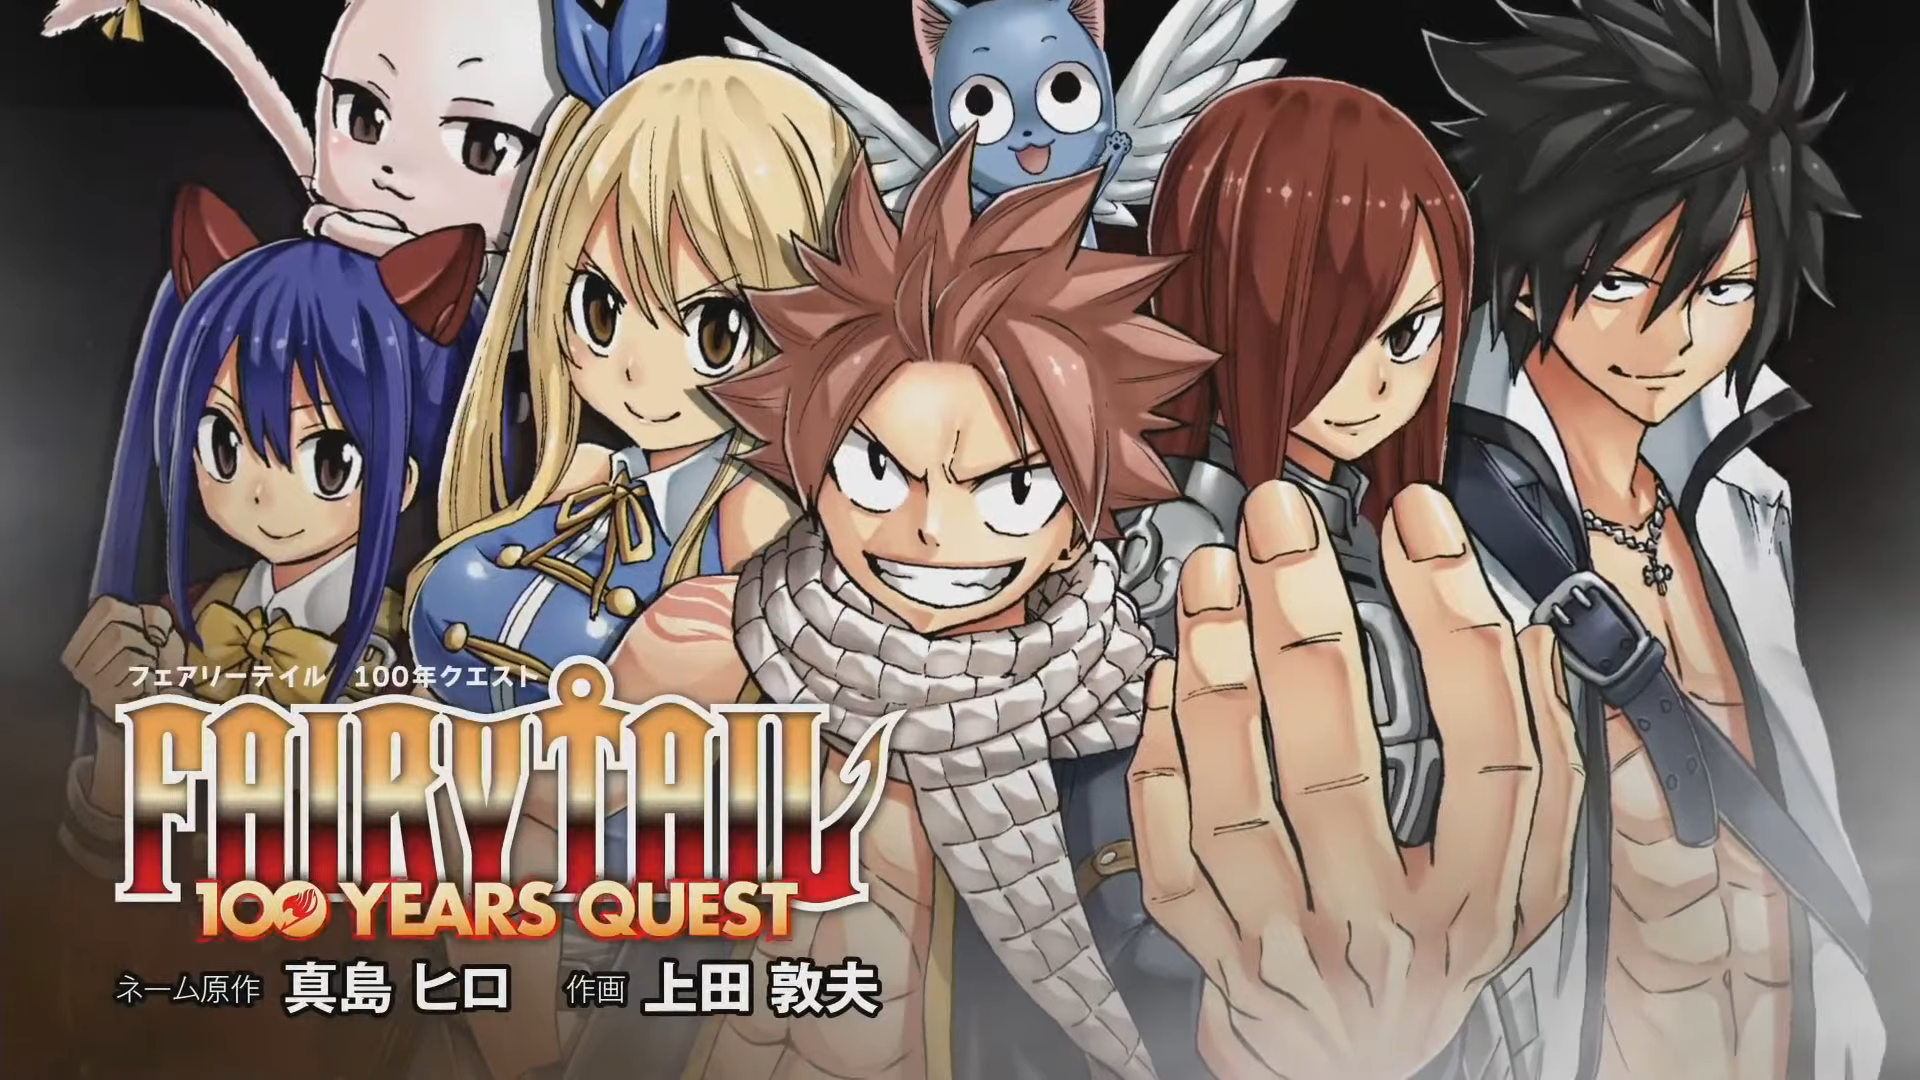 Fairy Tail: 100 Years Quest Anime Announced - Anime Corner